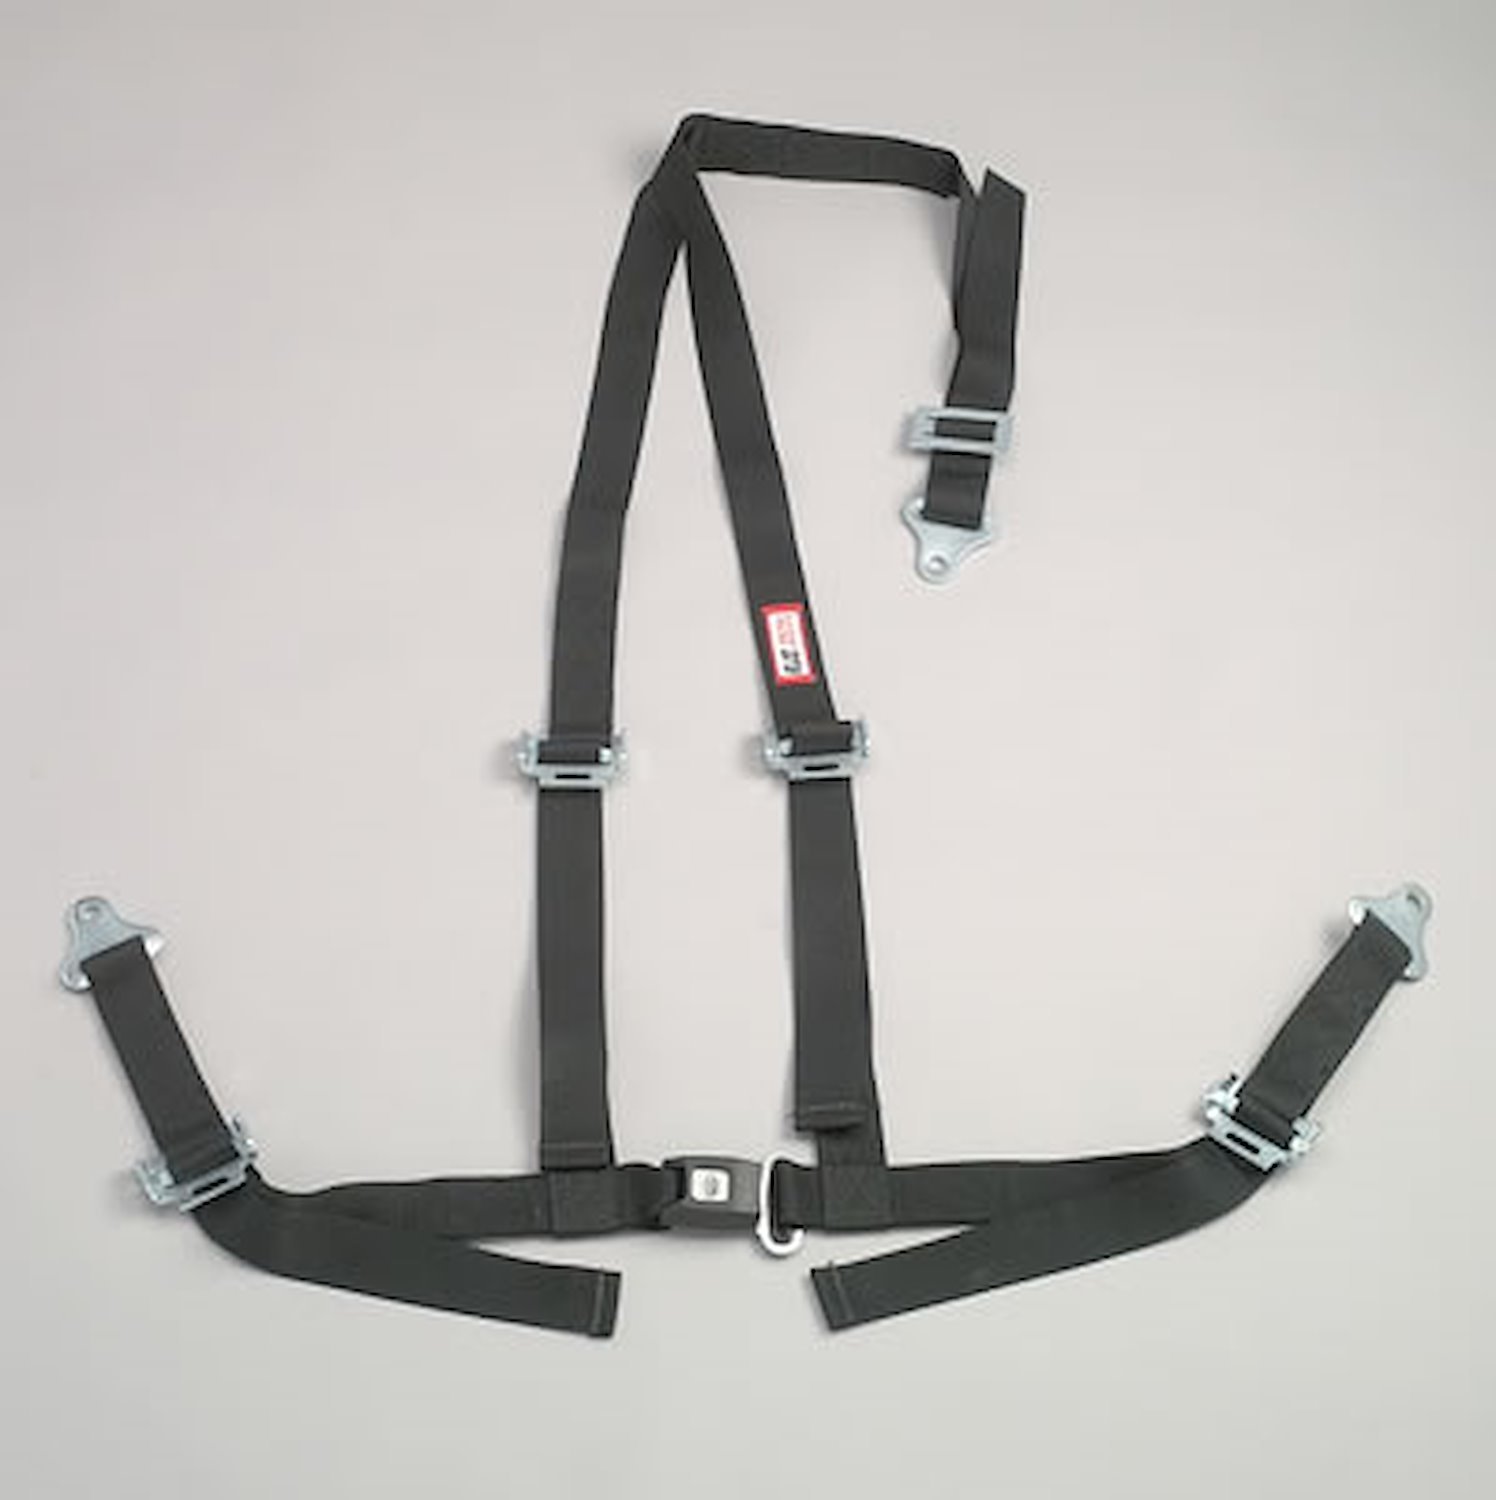 NON-SFI B&T HARNESS 2 PULL UP Lap Belt SNAP 2 S. H. Y FLOOR Mount WRAP/SNAP BLACK